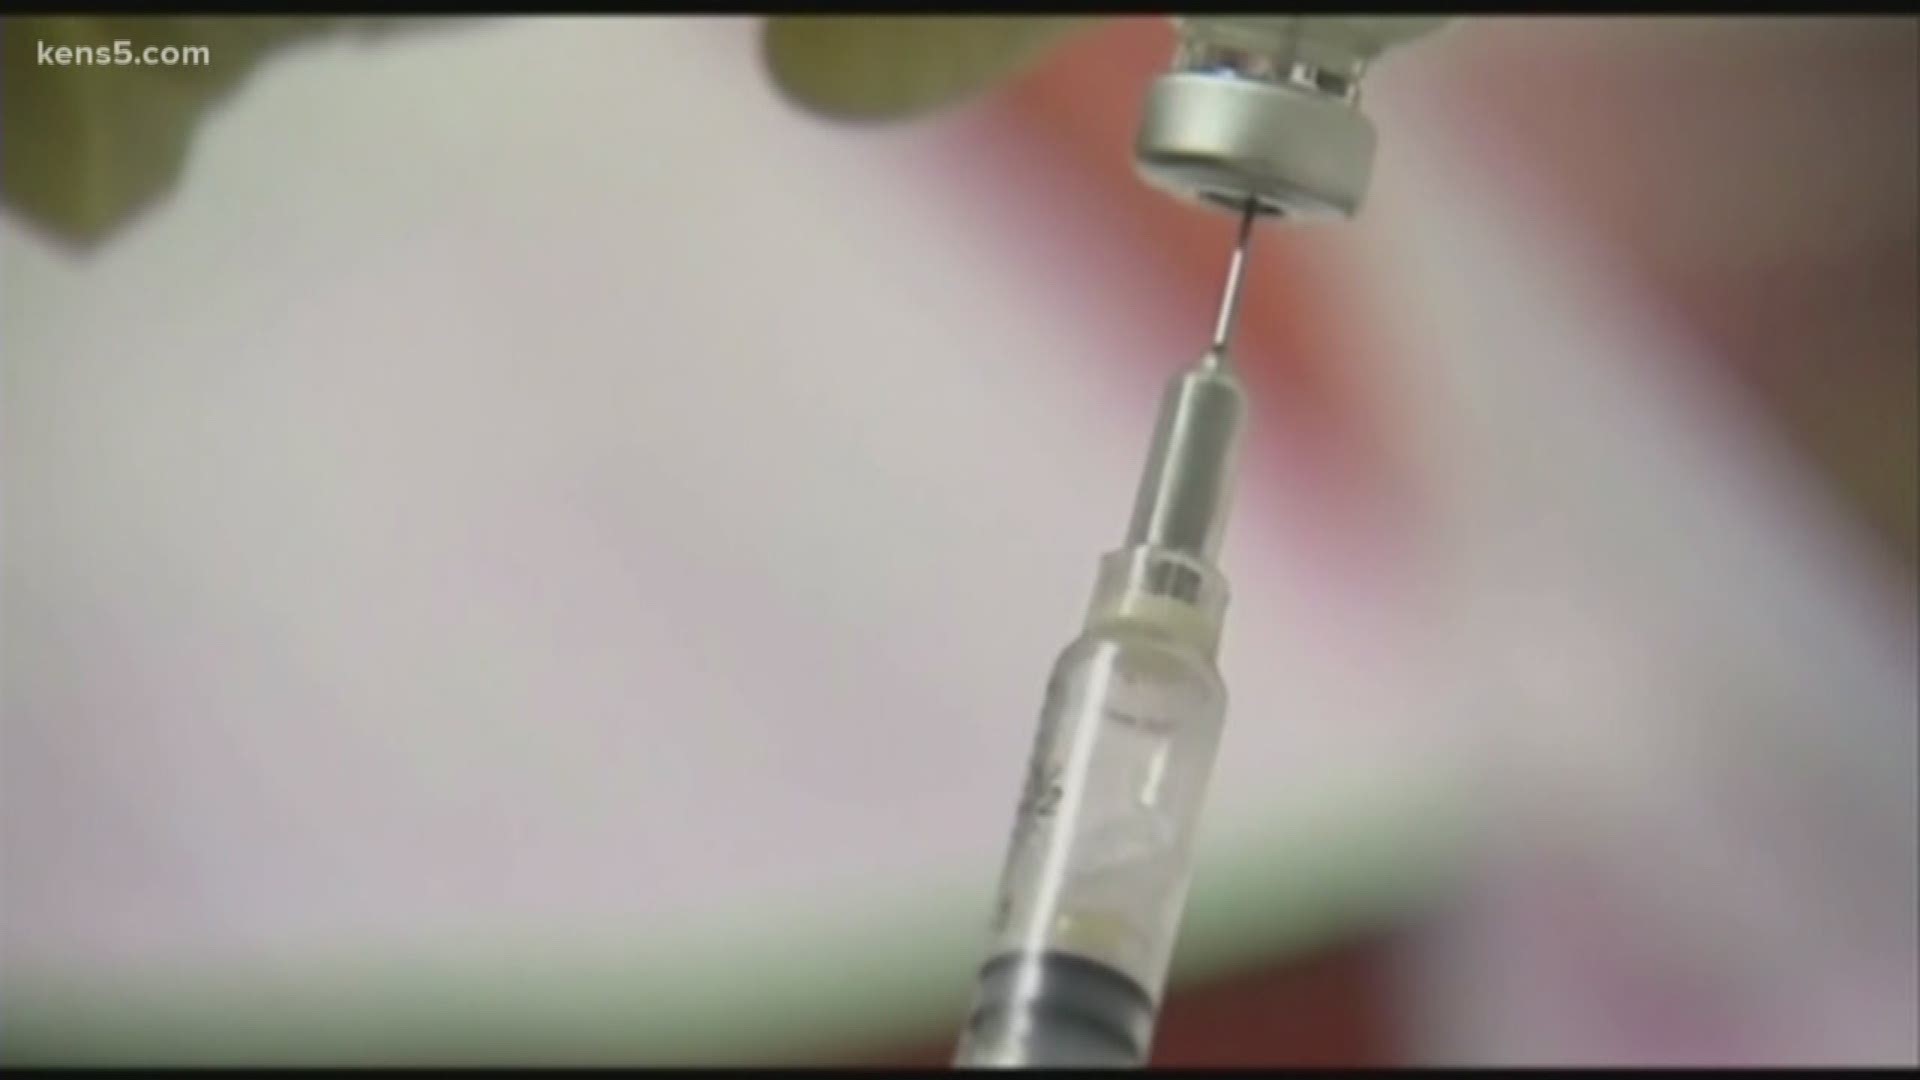 This year's flu season is almost here, and a new study underway right here in San Antonio is trying out a new vaccine that could save more lives.